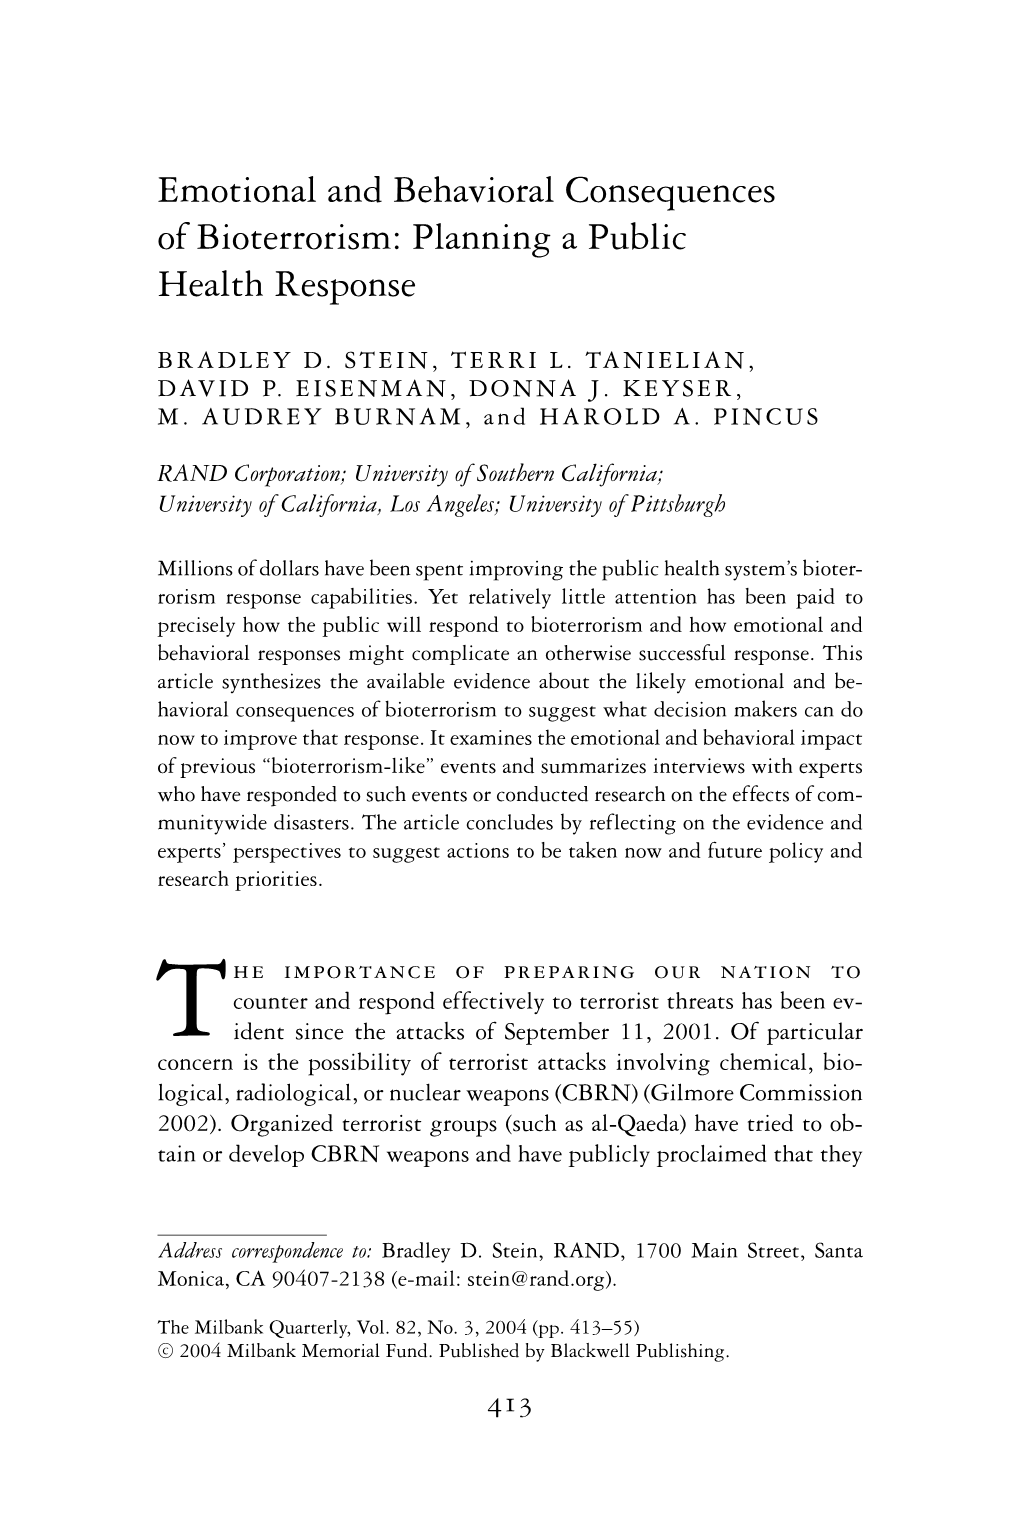 Emotional and Behavioral Consequences of Bioterrorism: Planning a Public Health Response